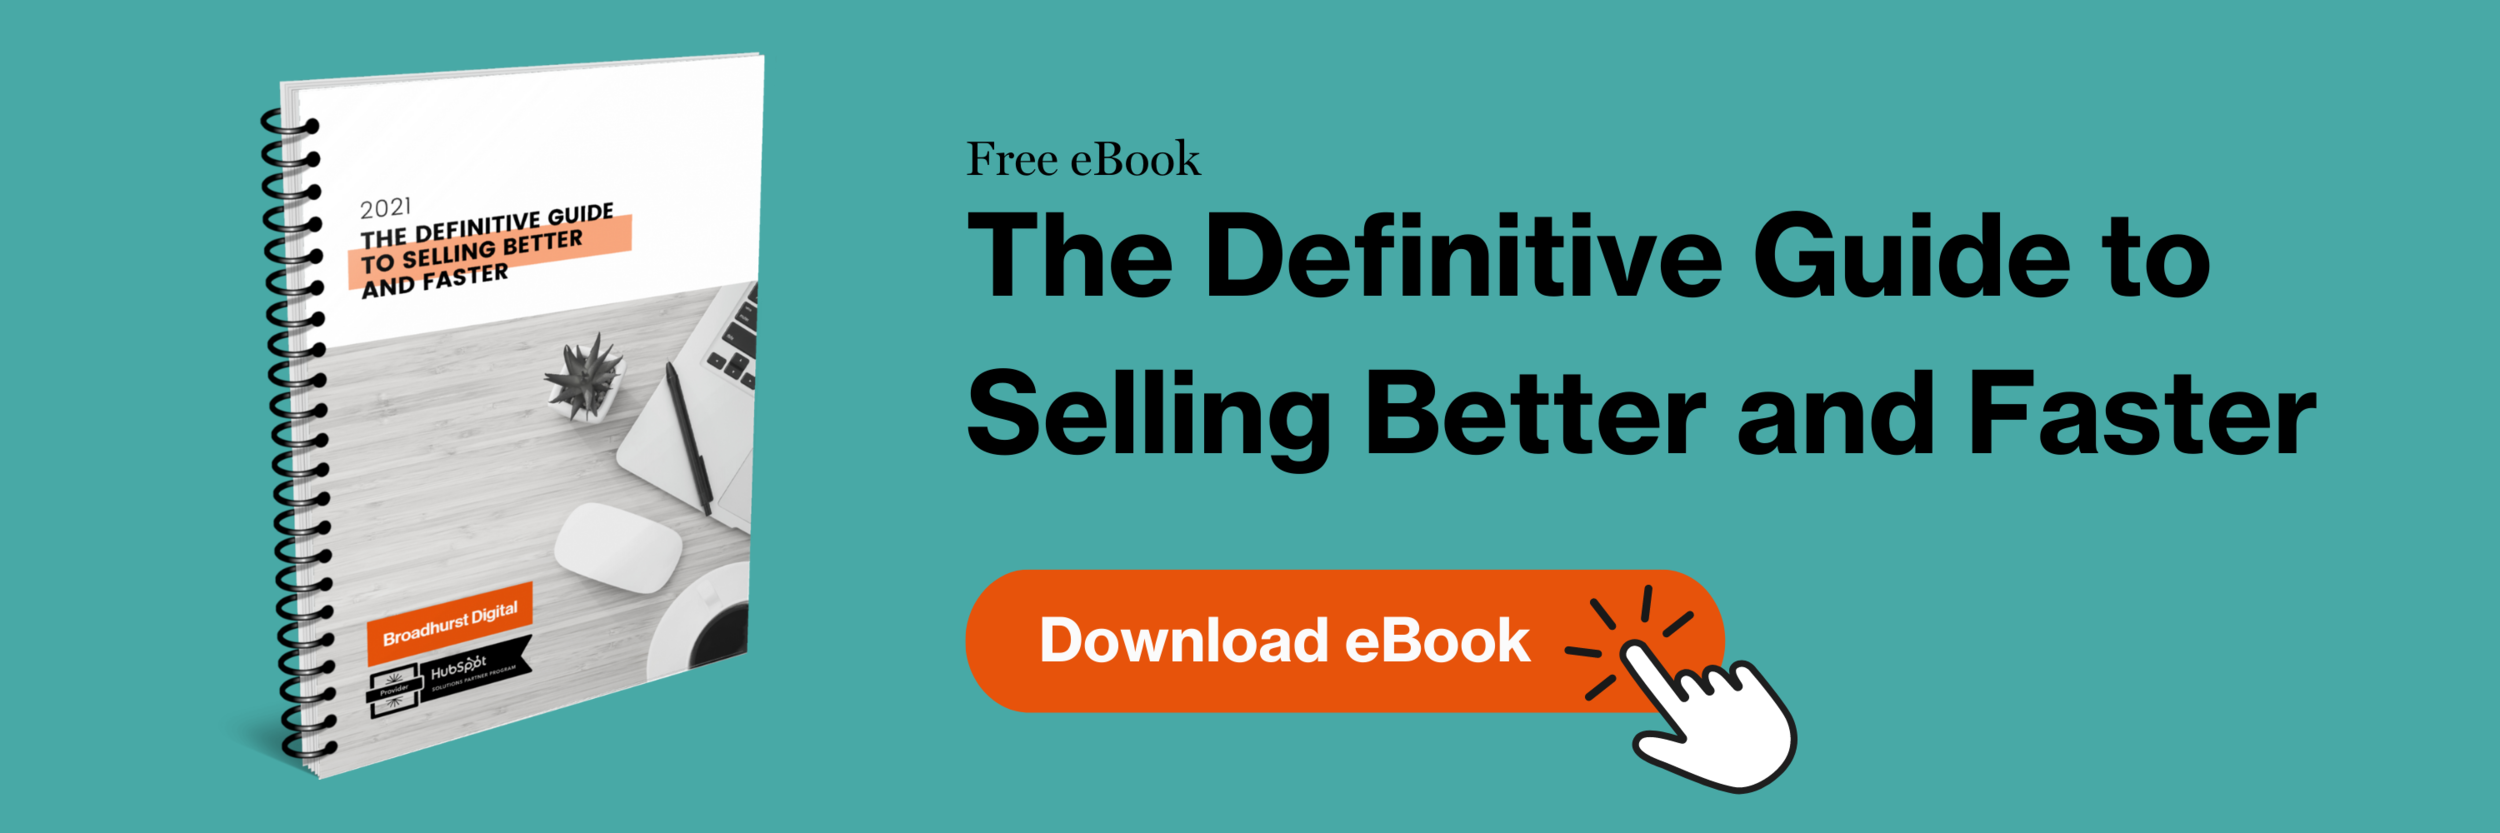 CTA The Definitive Guide to Selling Better and Faster.png